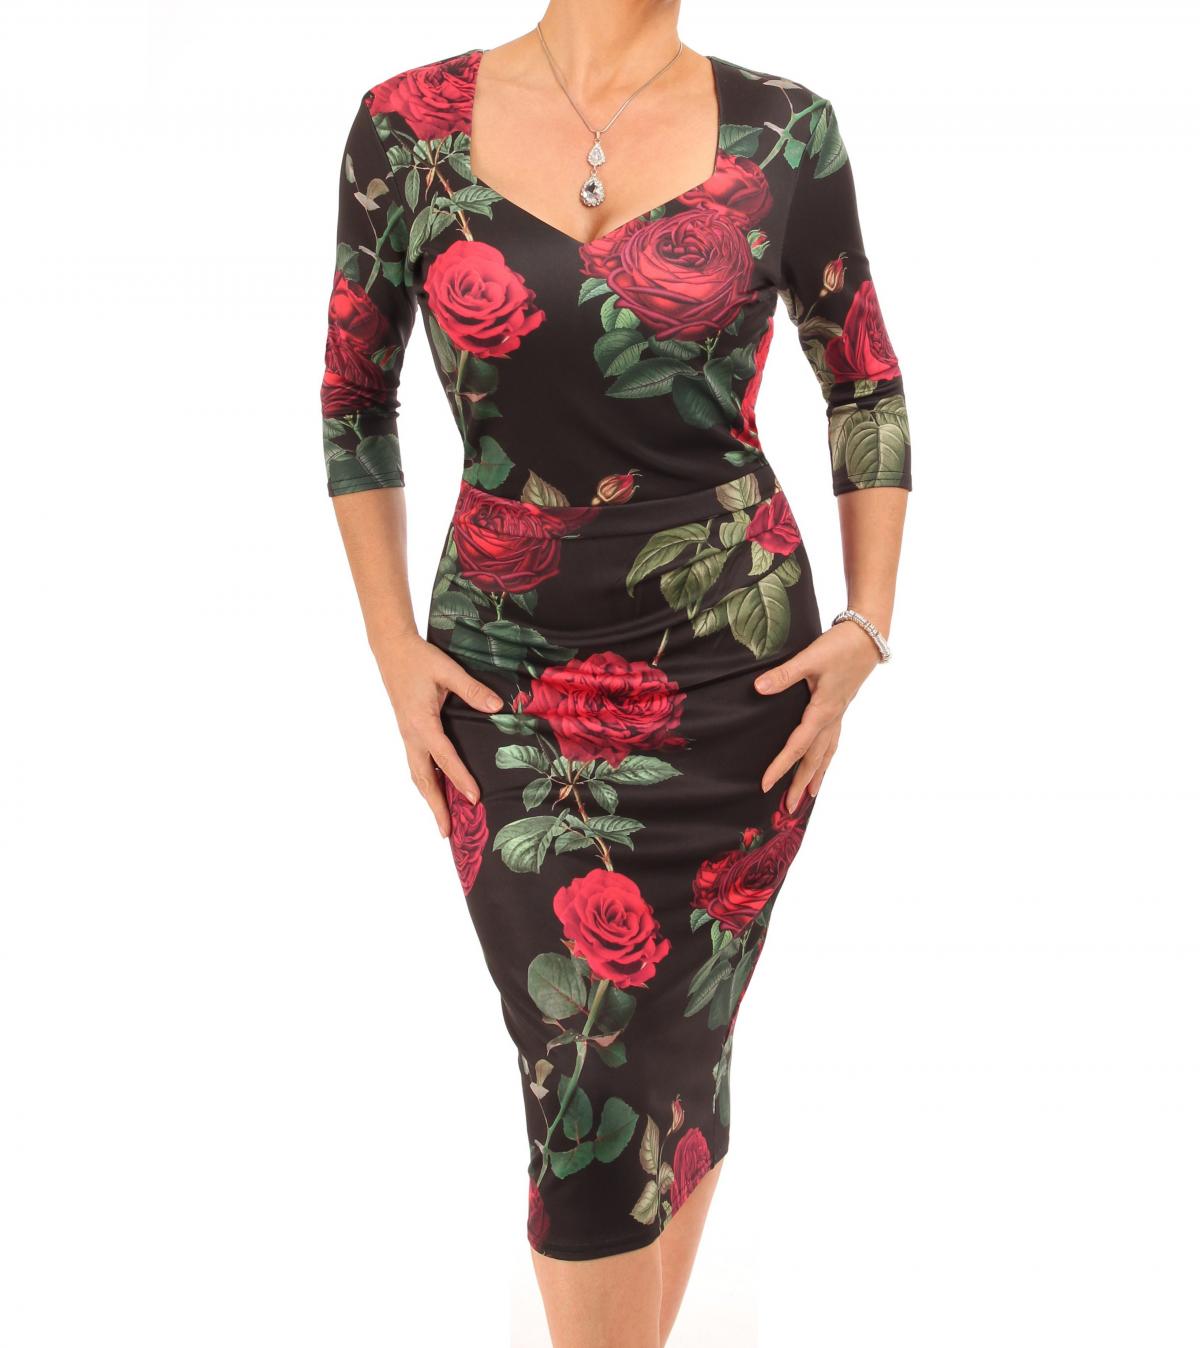 long black dress with red roses